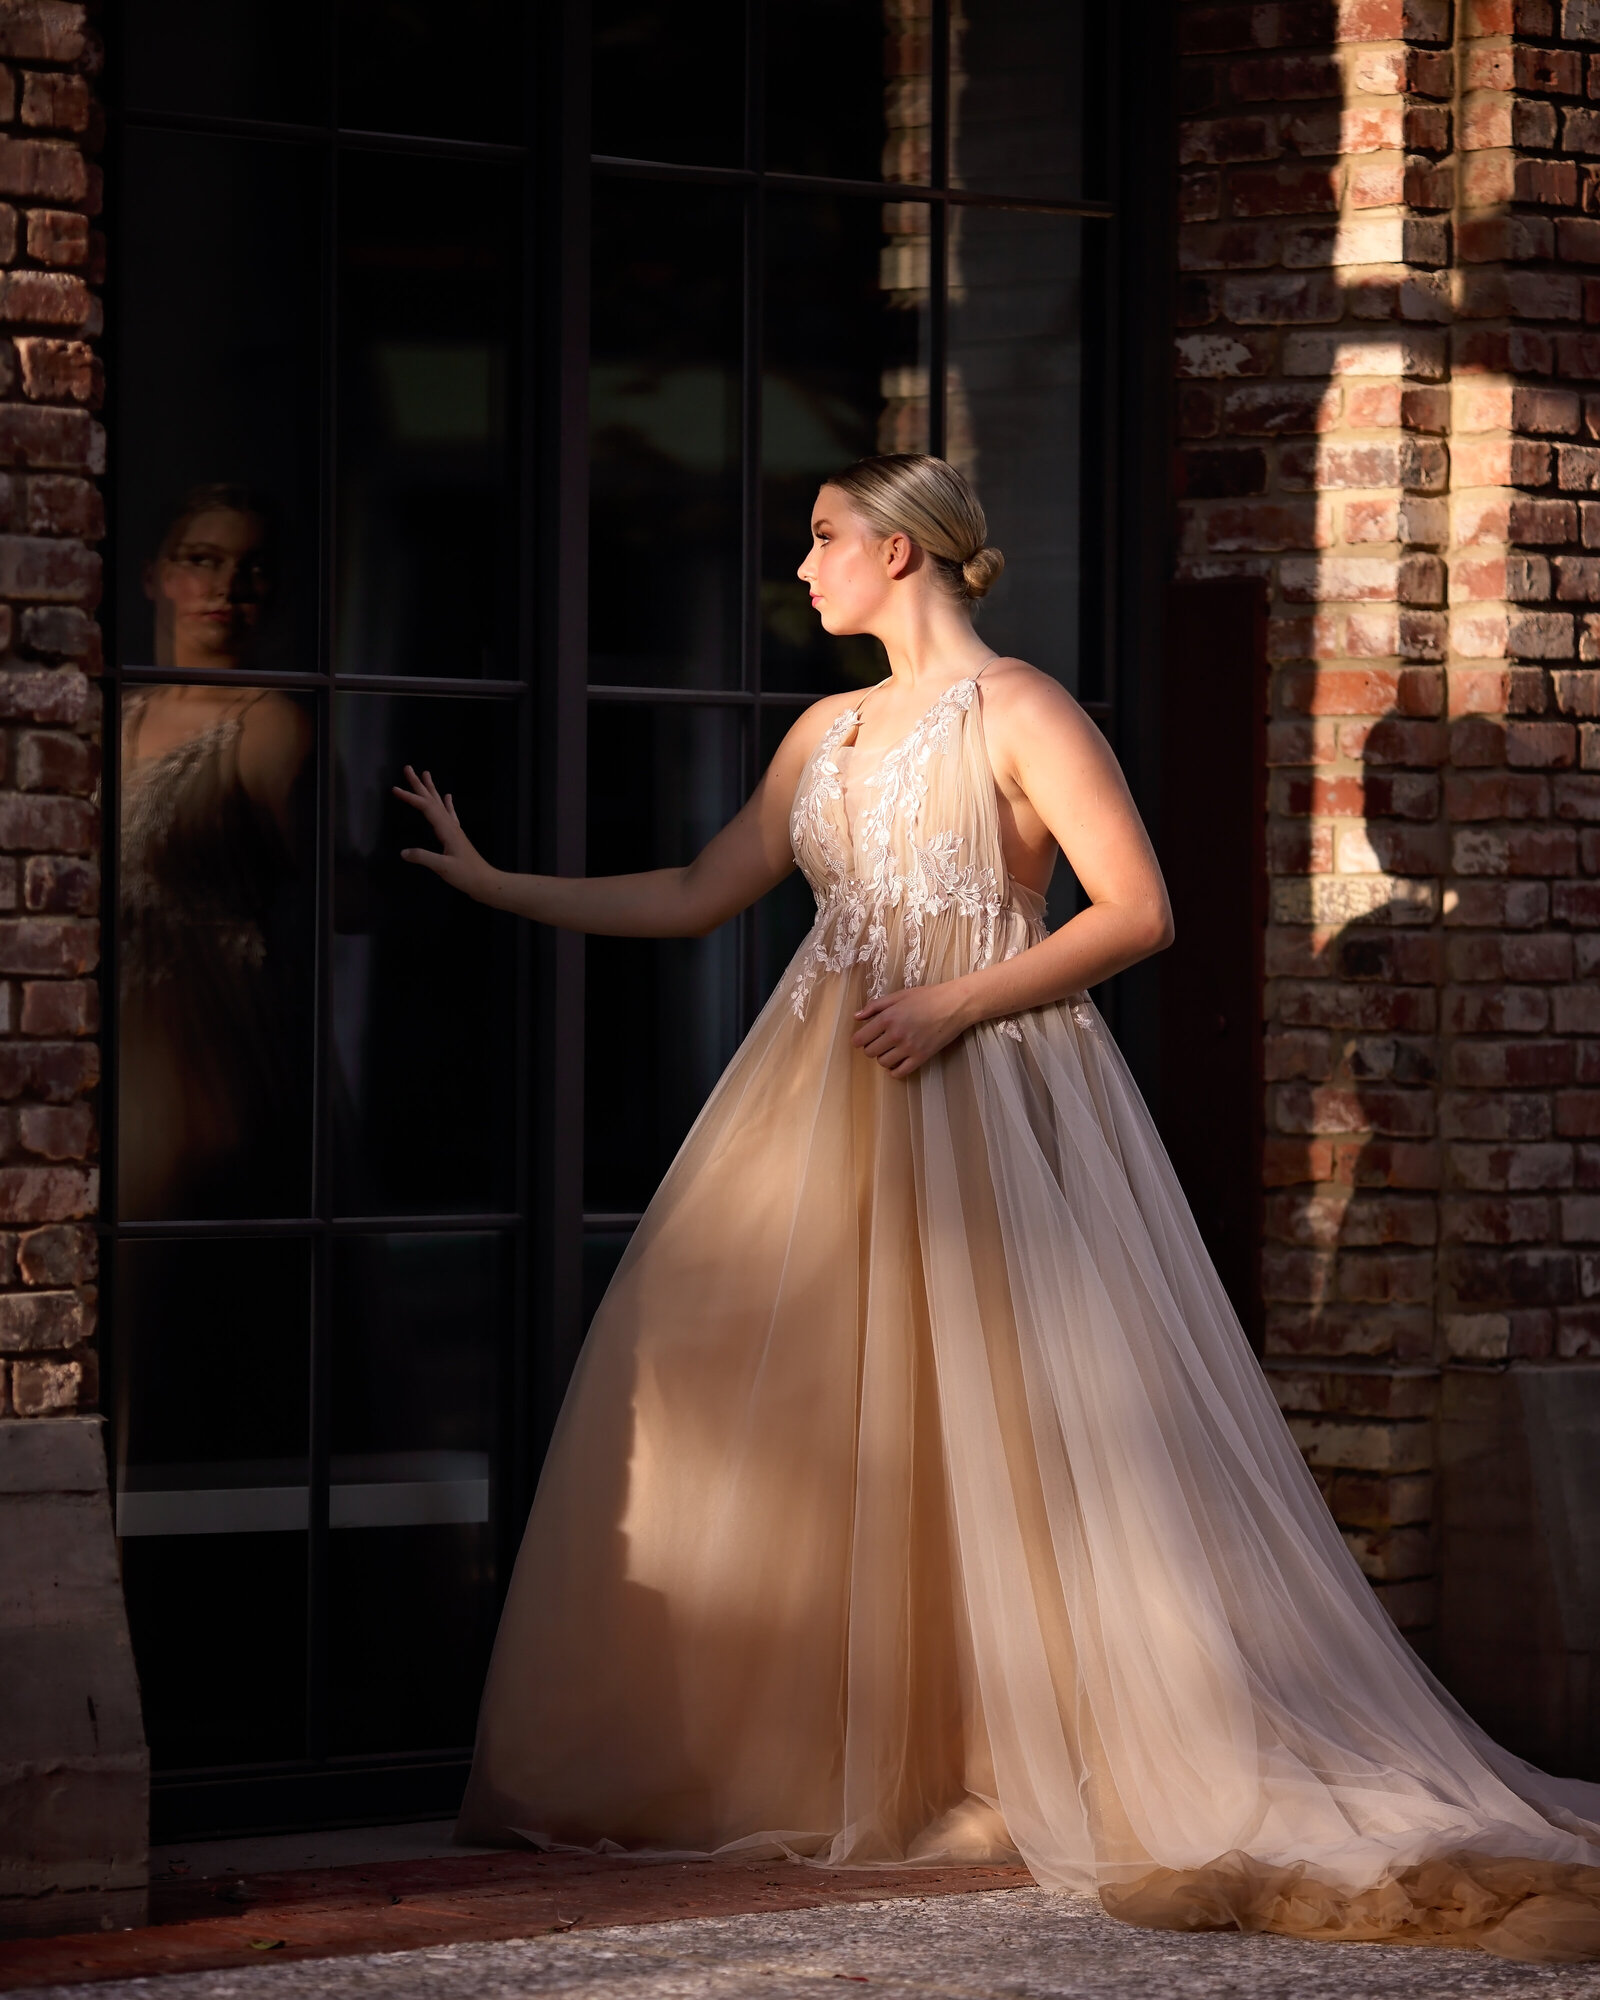 Savannah Boudoir Photography and Glamour showcases gorgeous blond dancer in flowing glamour gown relection in window